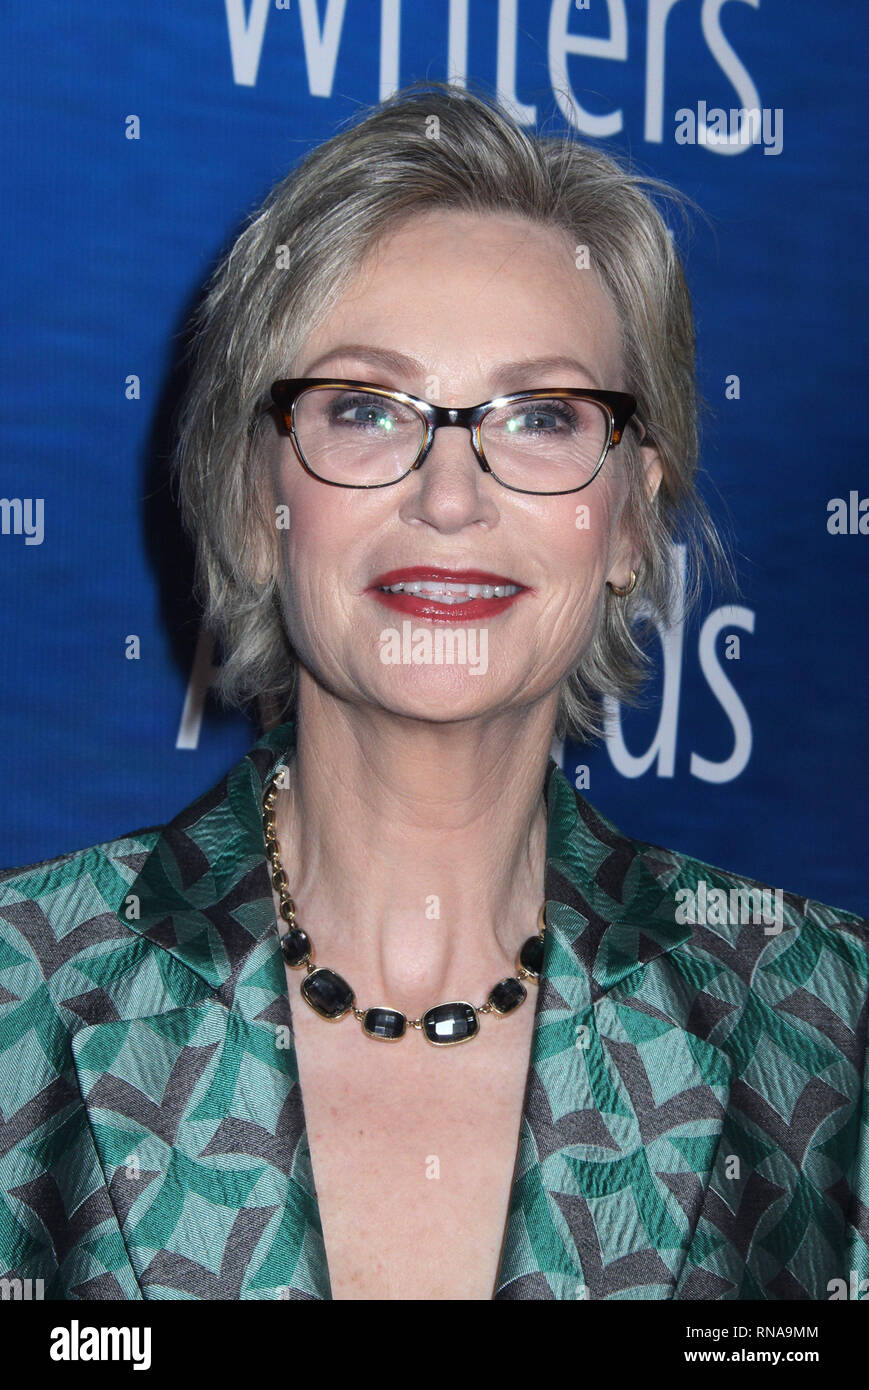 Los Angeles, USA. 17th Feb, 2019. Jane Lynch  02/17/2019 2019 Writers Guild Awards held at The Beverly Hilton in Beverly Hills, CA  Photo: Cronos/Hollywood News Credit: Cronos/Alamy Live News Stock Photo